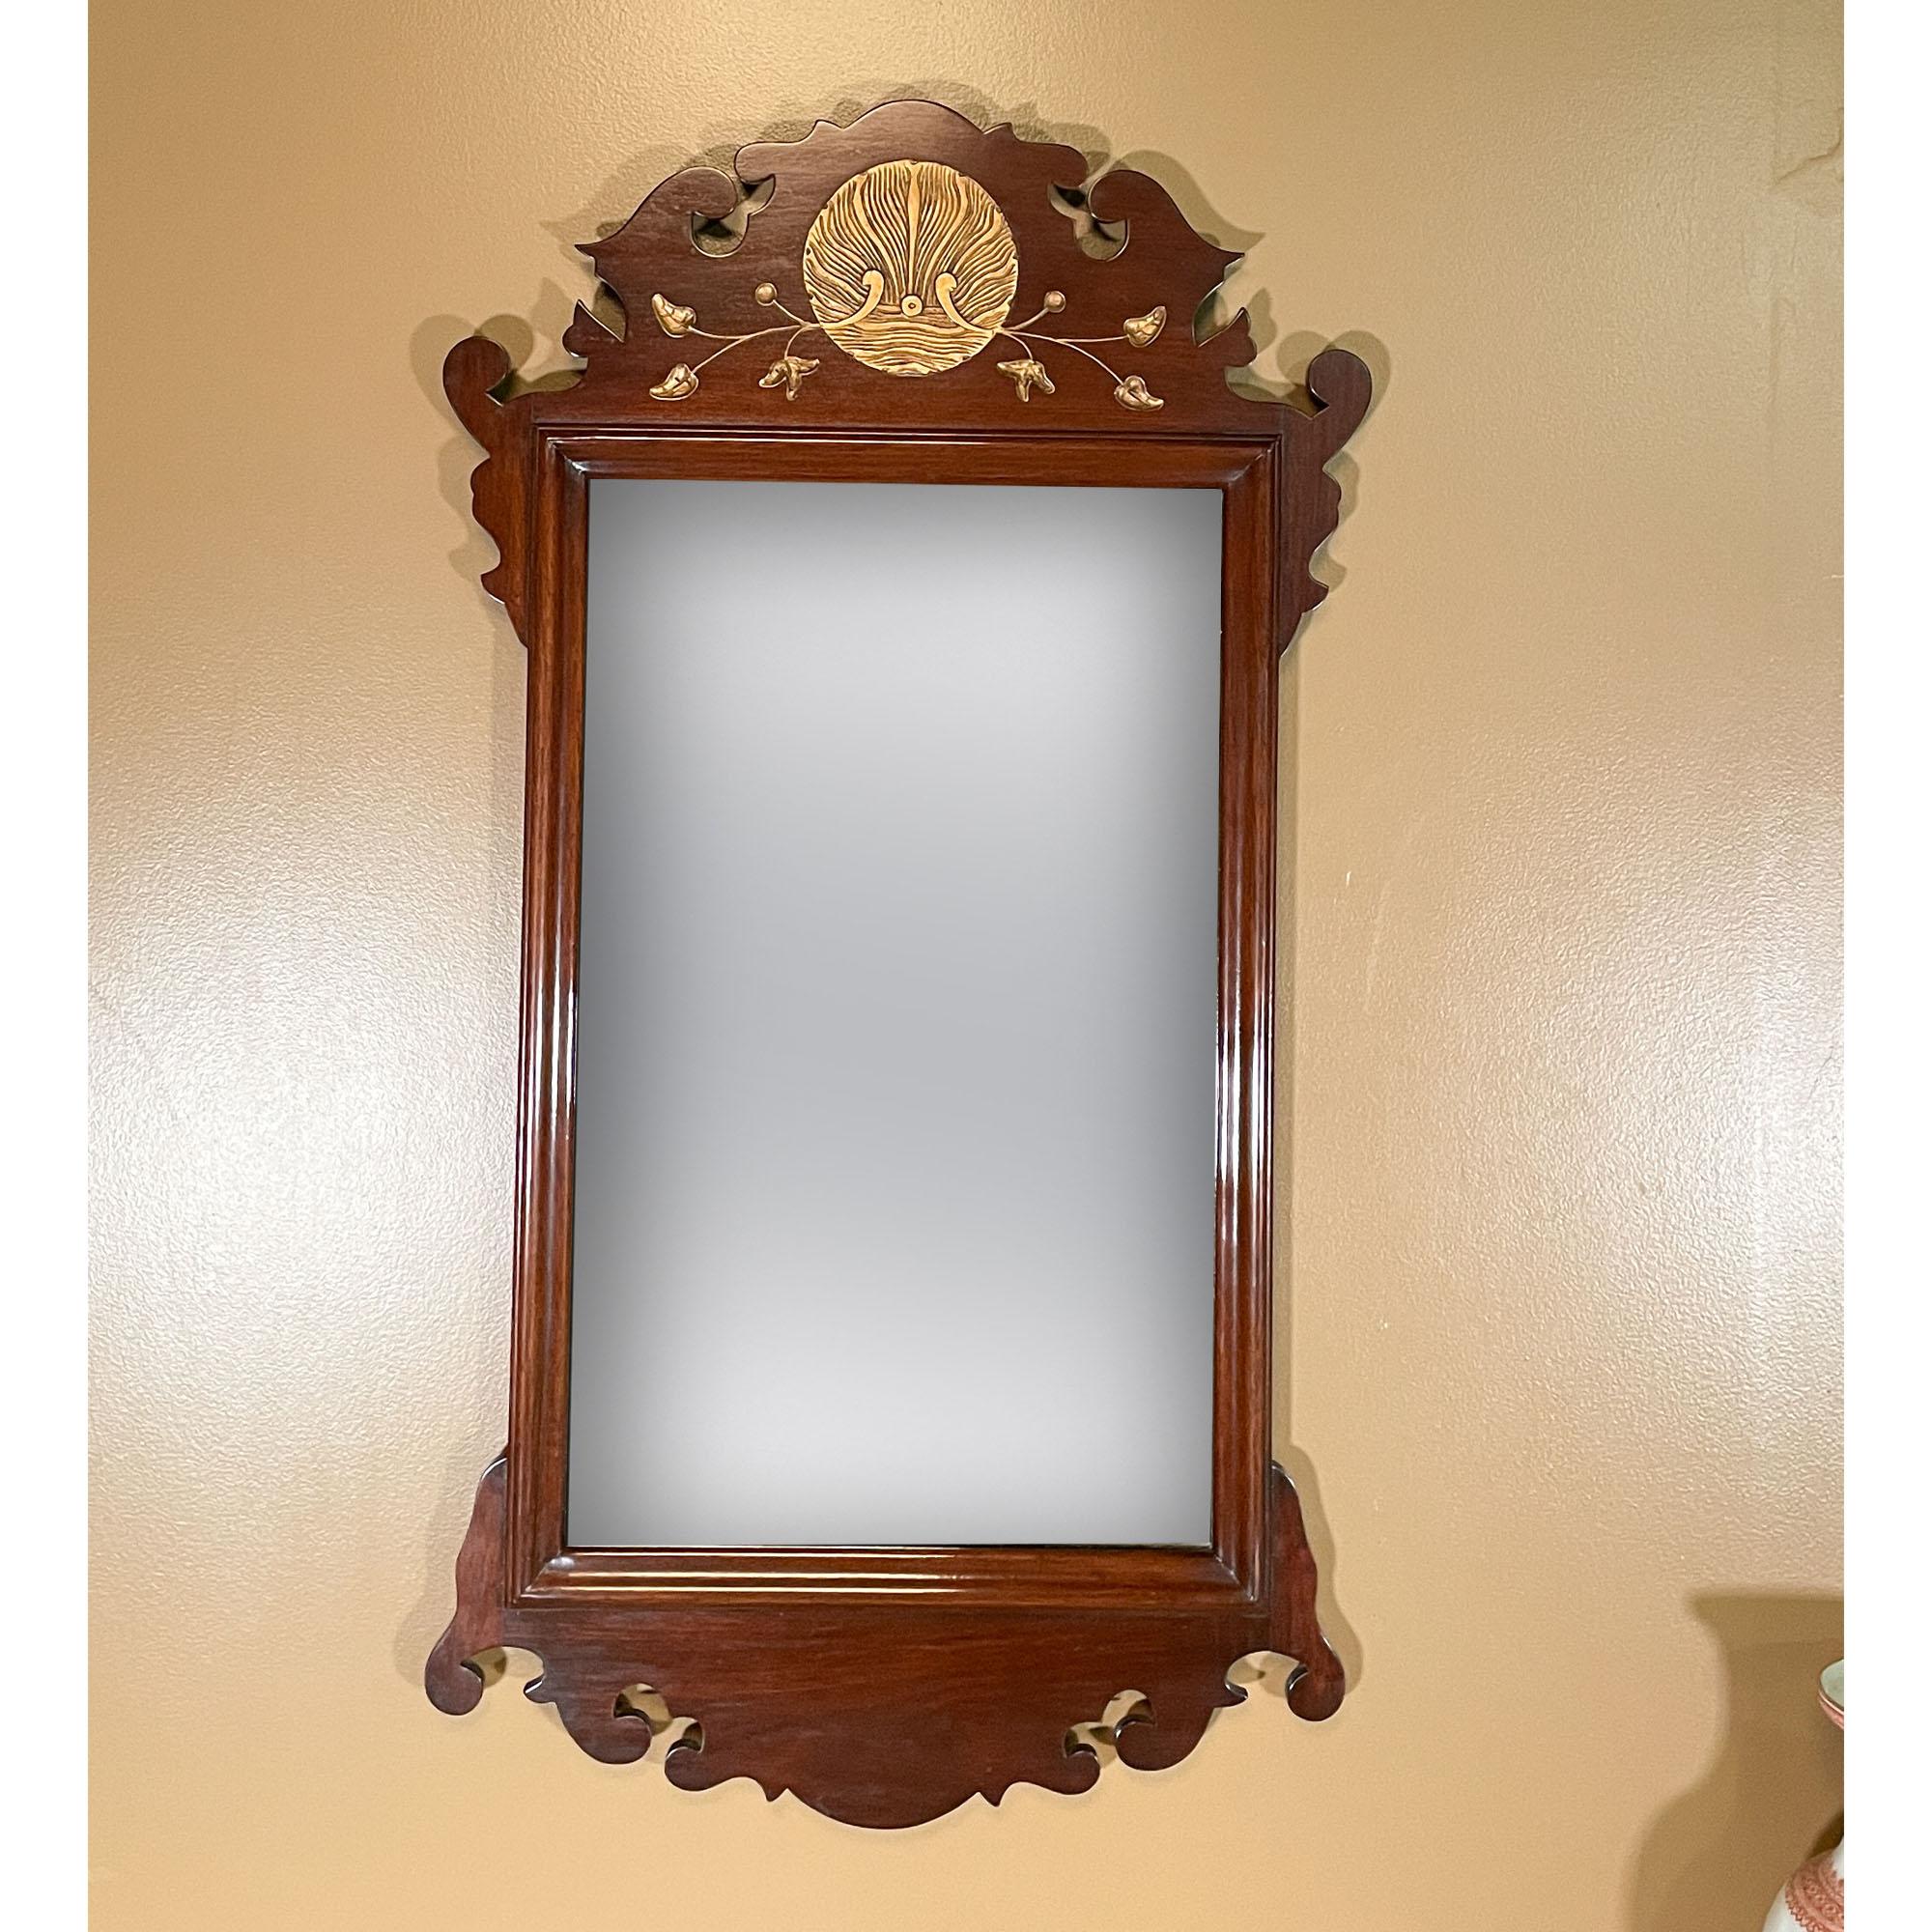 A Mahogany Mirror with Carved Top and Gold Leaf Details. This mirror has many elegant details throughout; including the original glass, the original finish, fantastic gold leaf work on the hand carved details along the top.

Everything on this